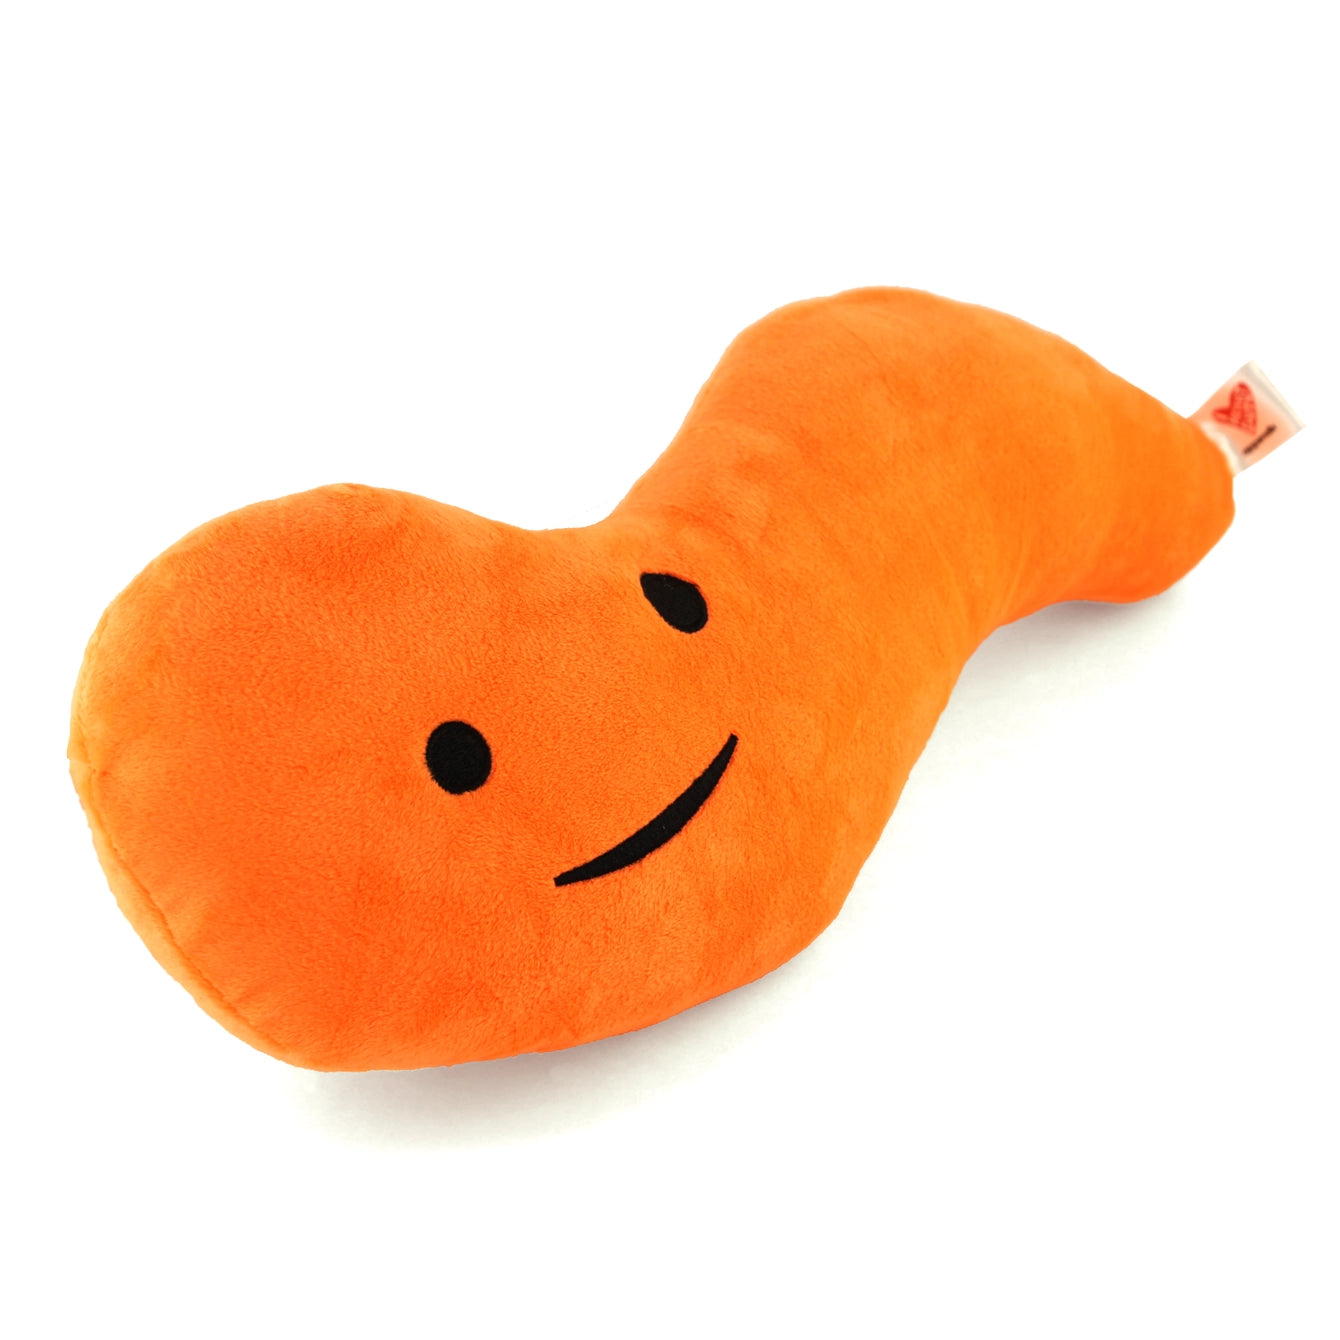 plushie appendix - Feel it in your gut